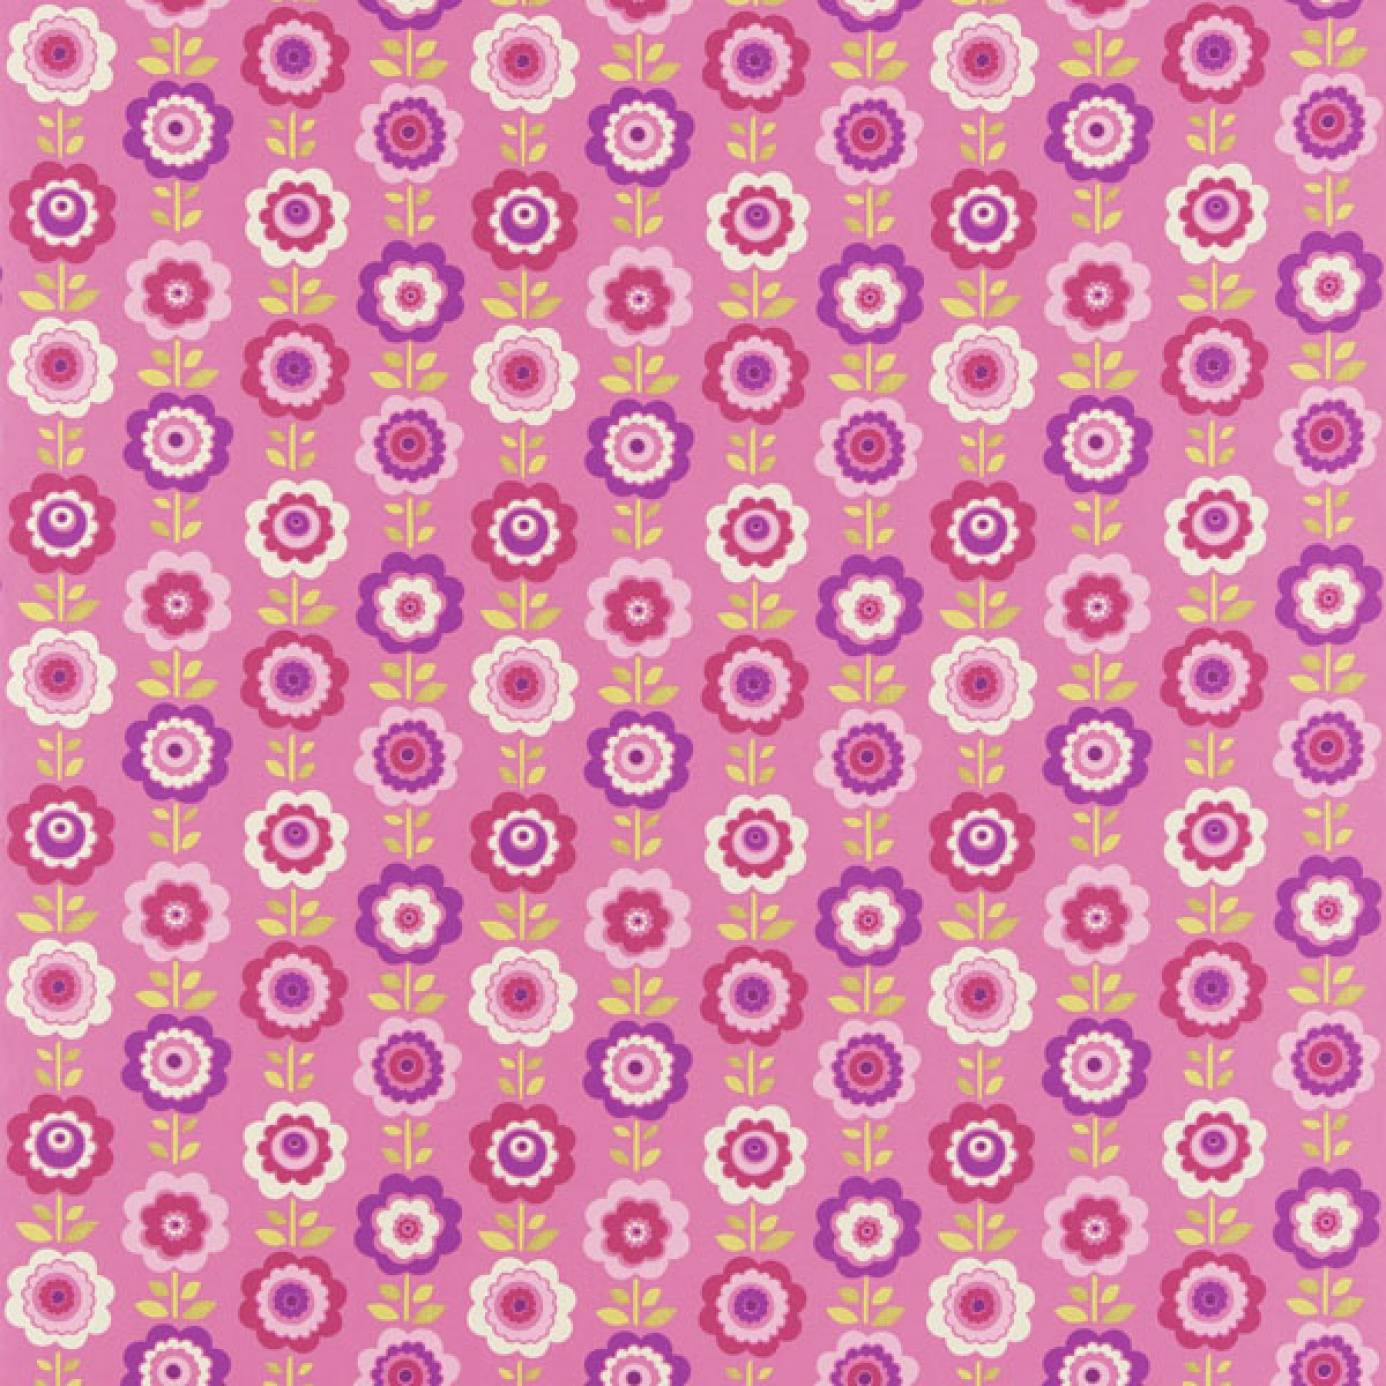 Harlequin All About Me Fabrics Wallpaper Oopsie Daisy Fabric Pink